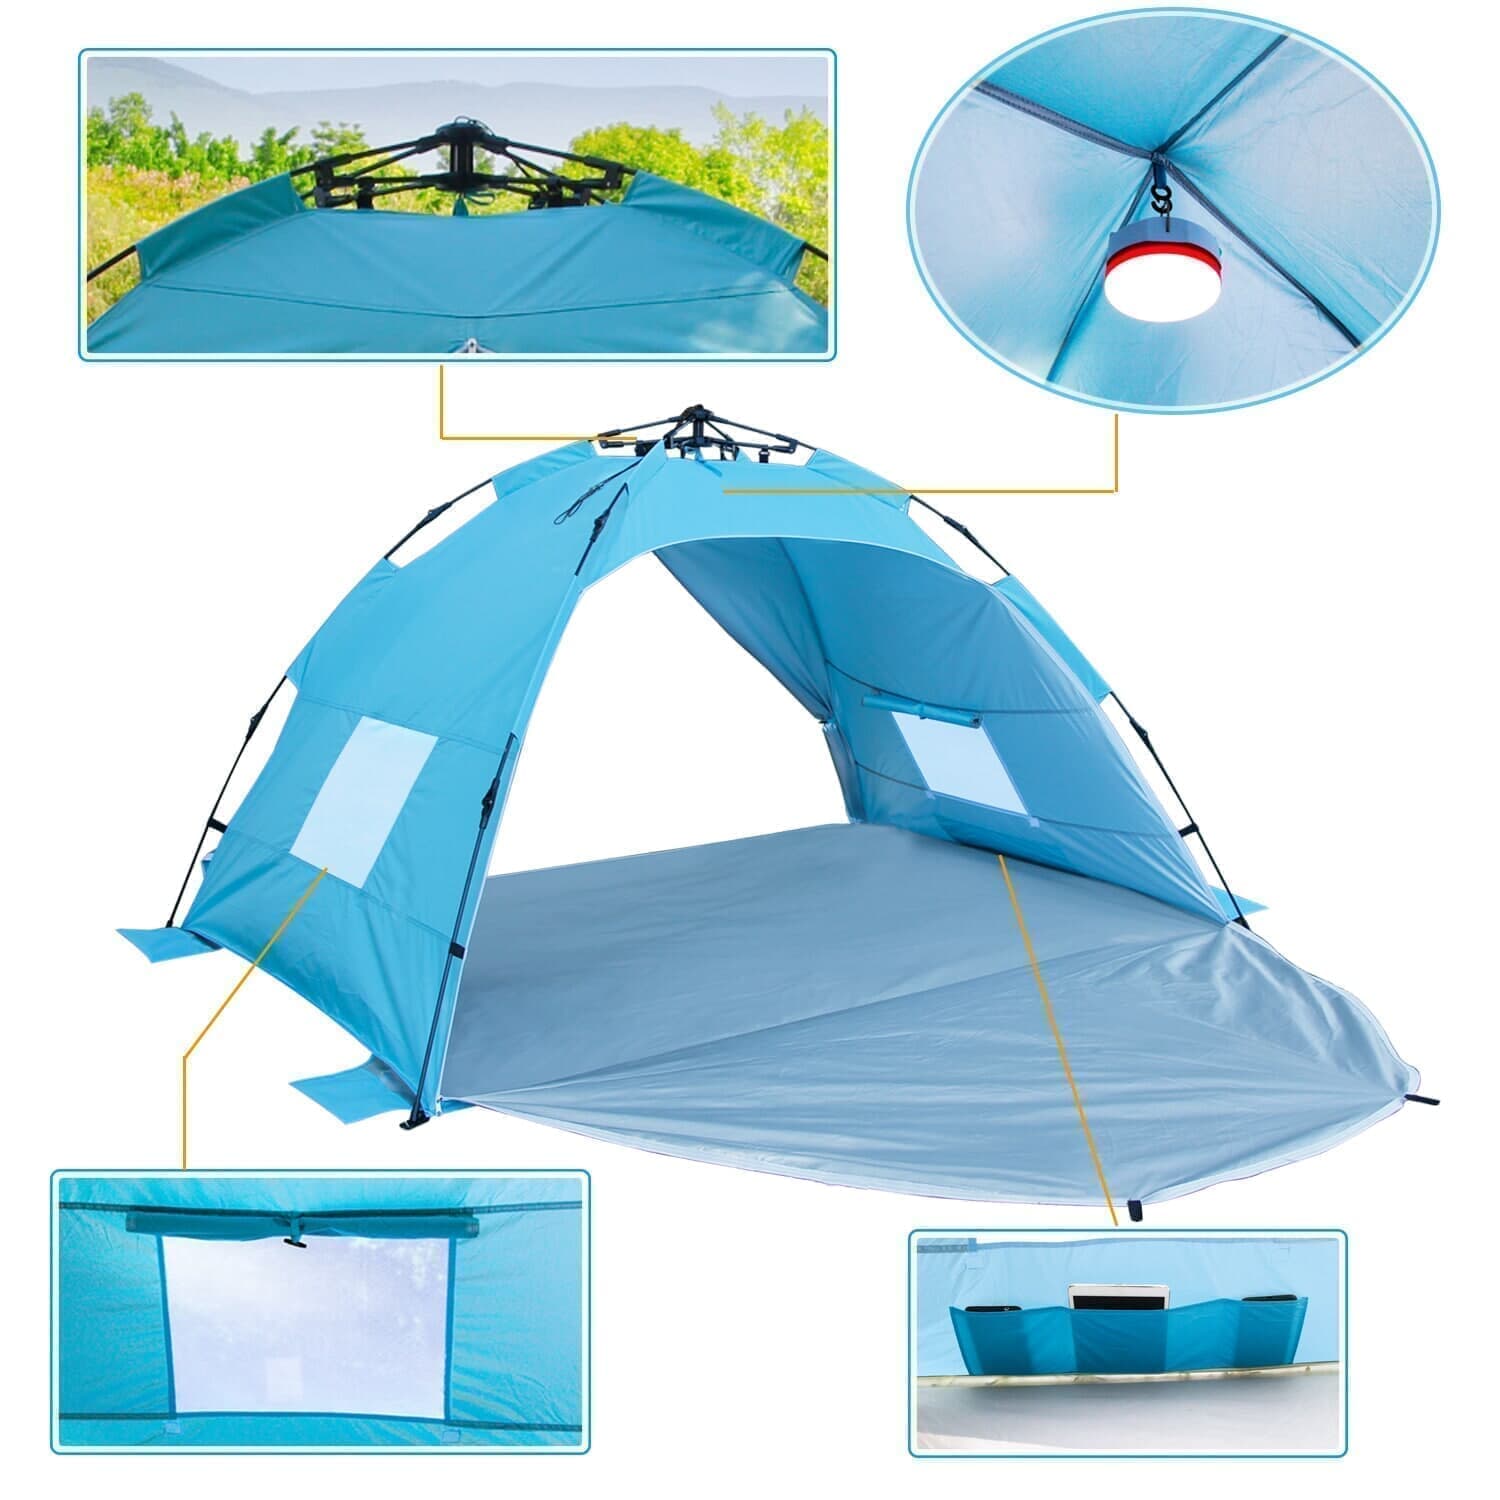 Homfu Sun shelter Beach Tent 3 or 4 Person Automatic Camping Tent with UV Protection pop up Beach Shade for Outdoor Activities Easy Set up ALPIKA Beach Tent Outdoor Camping Tent Sun Shelter Family Tent For 2-4 Person 26.5